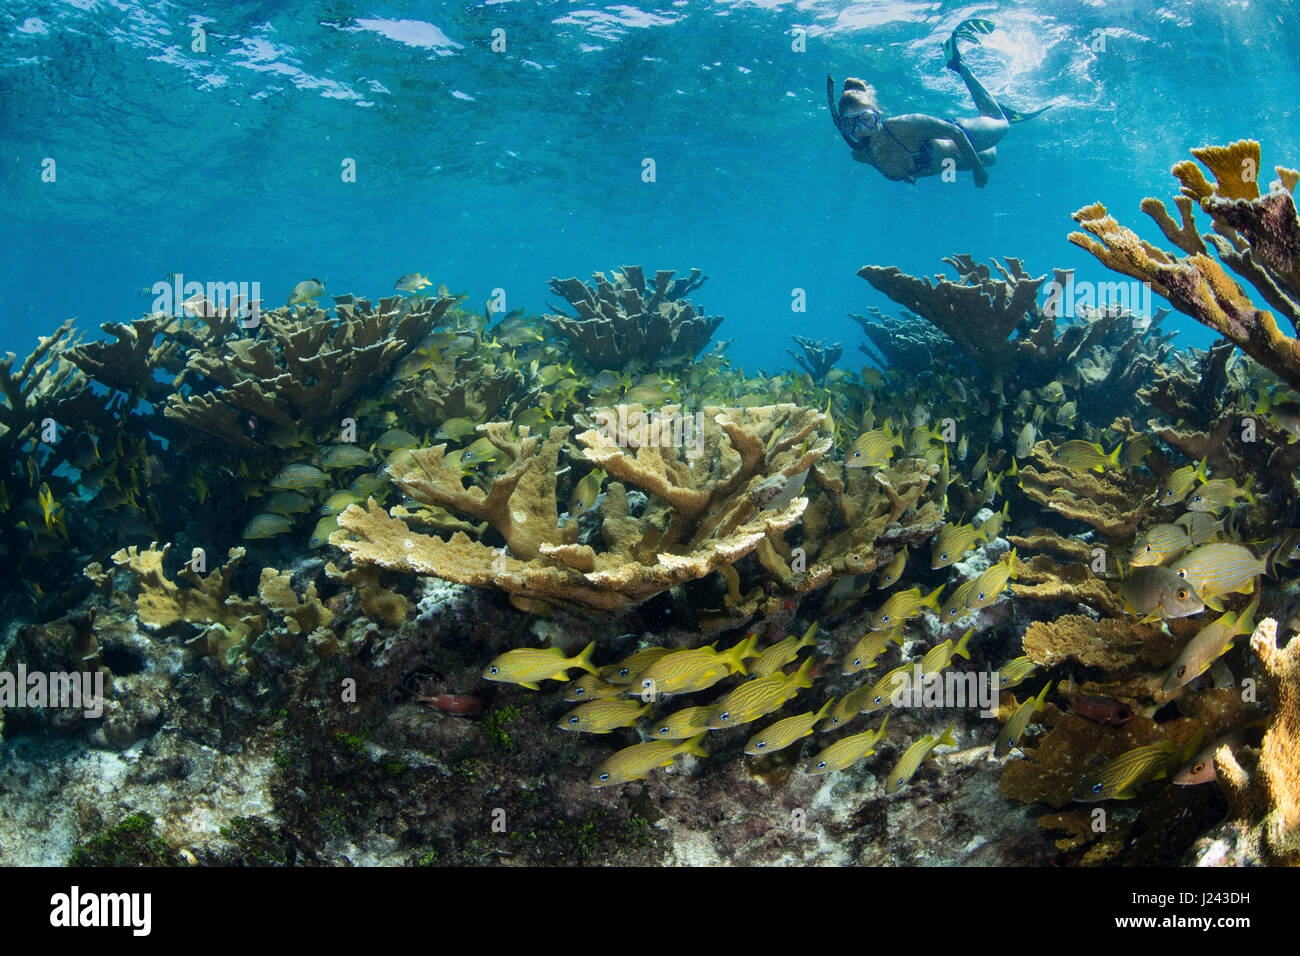 Snorkeler floats over field of hard corals. Stock Photo